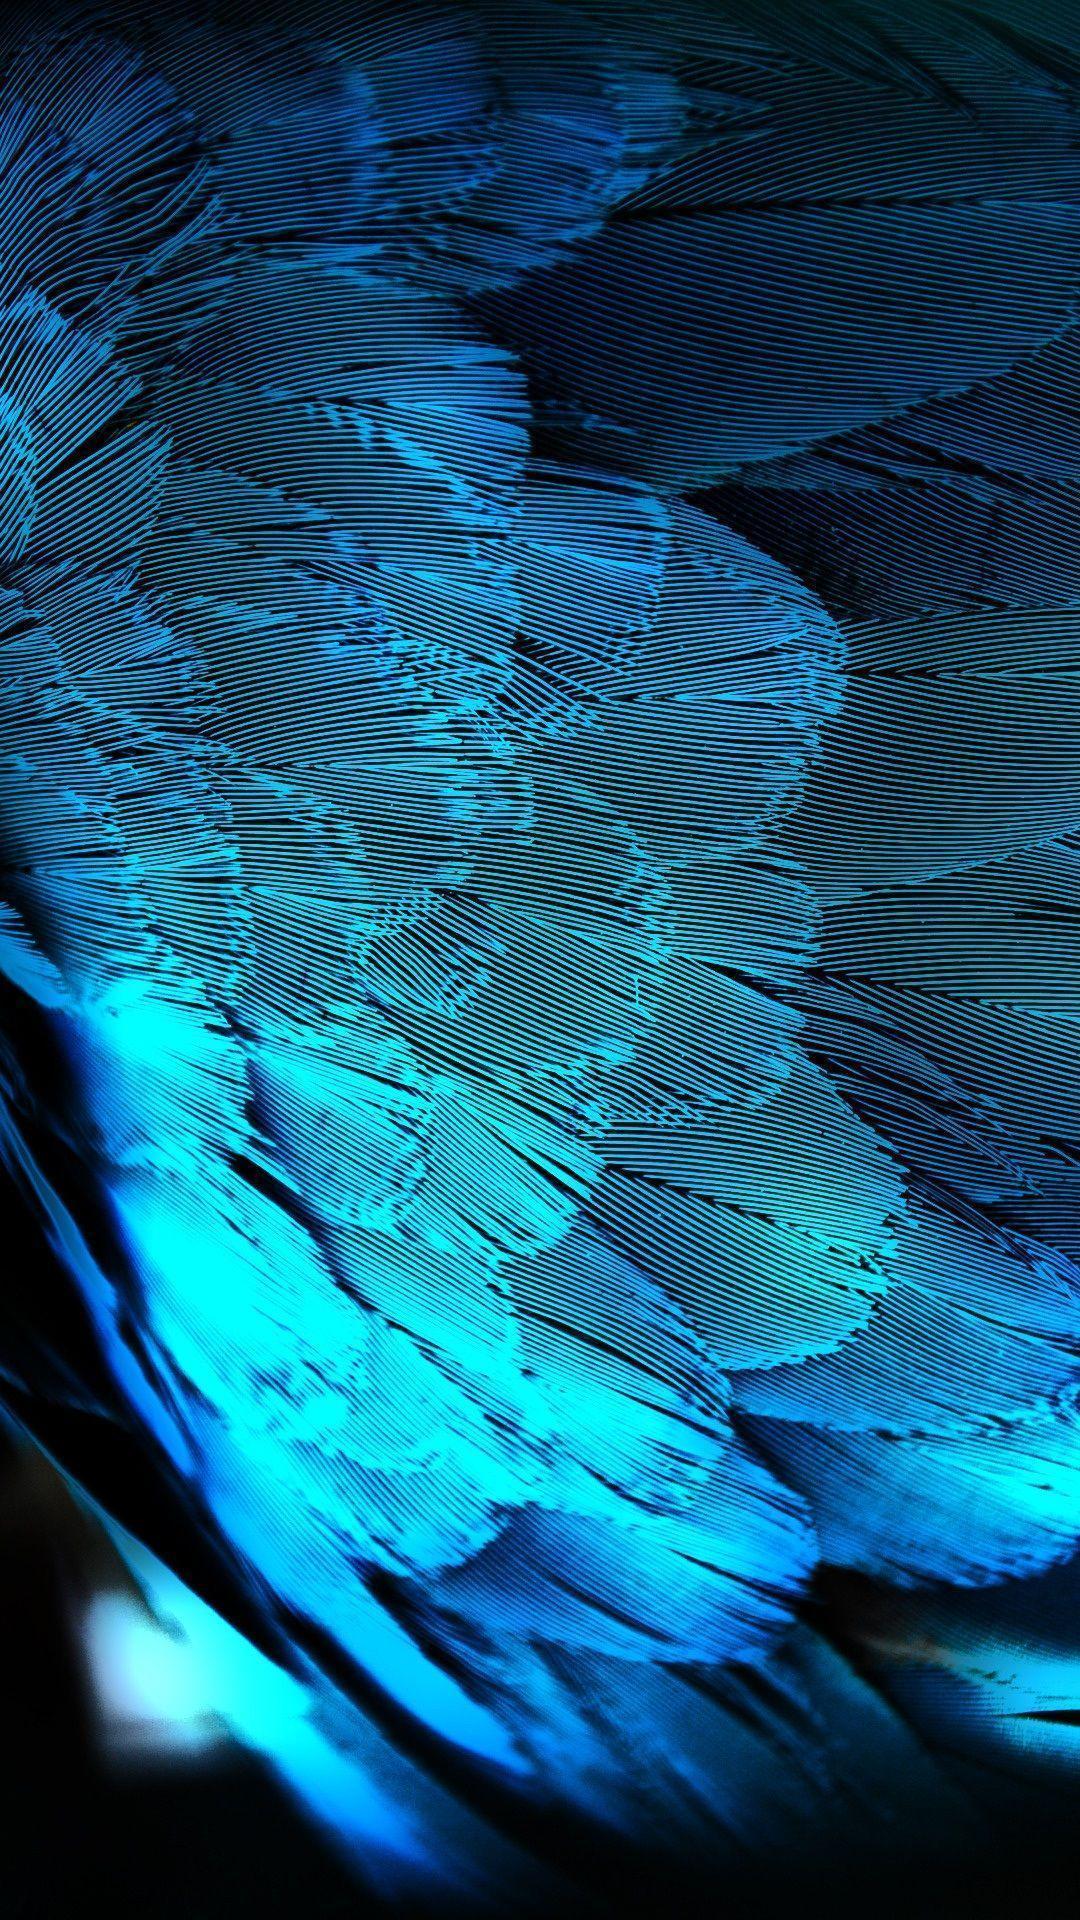 Blue HD Peacock Feathers Android Wallpapers free download